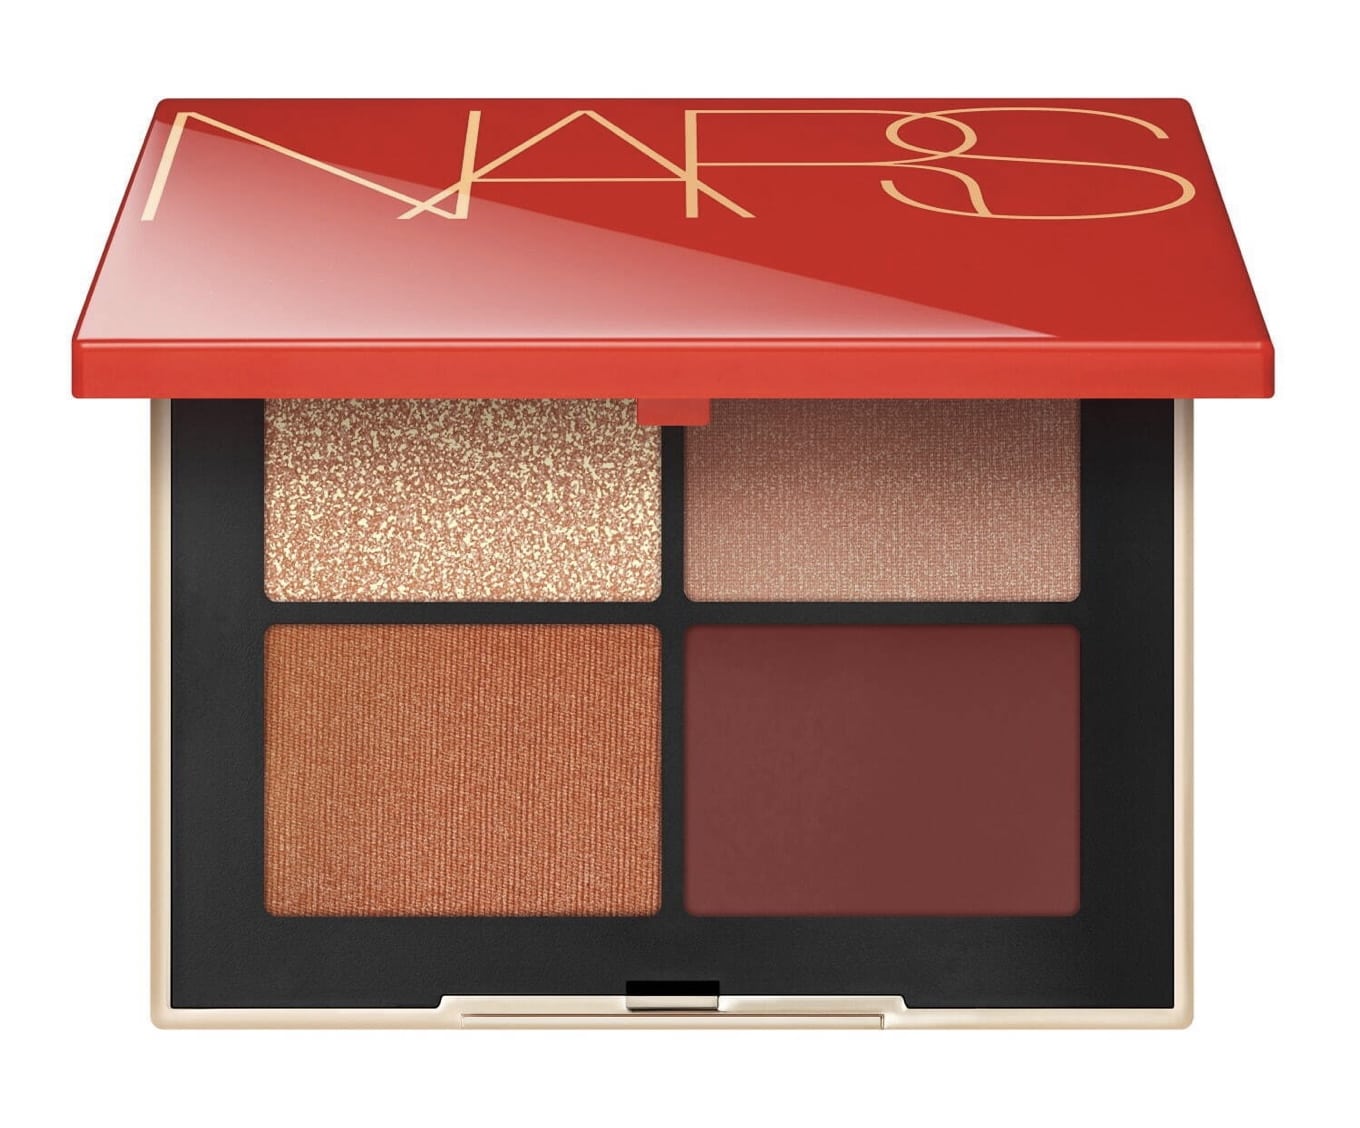 nars collection nouvel an chinois 2022